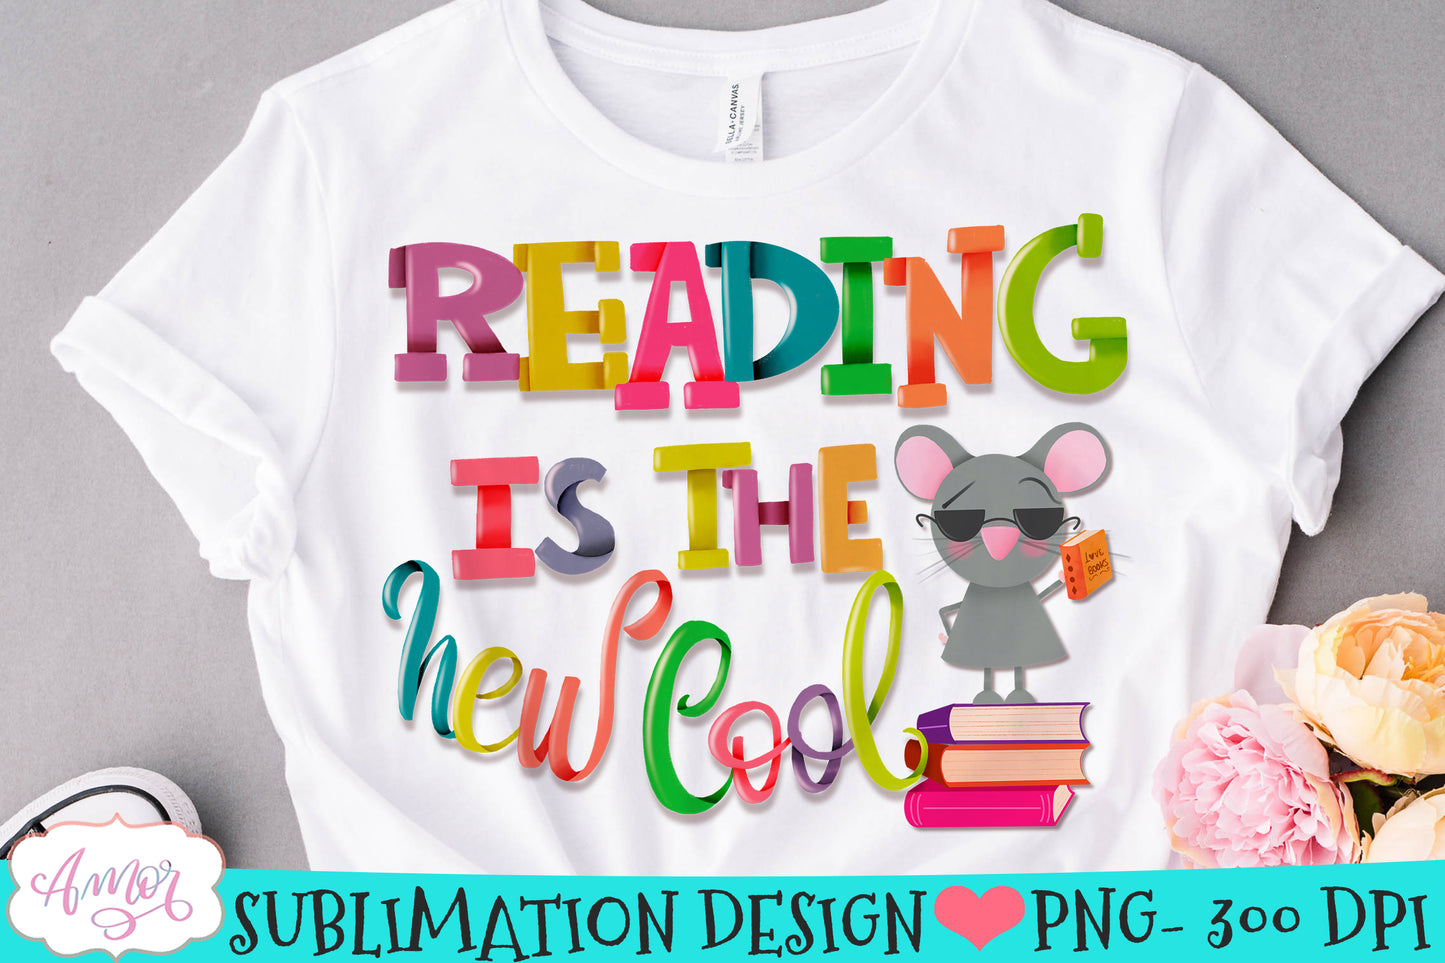 Reading is cool sublimation design | Book lover PNG graphic